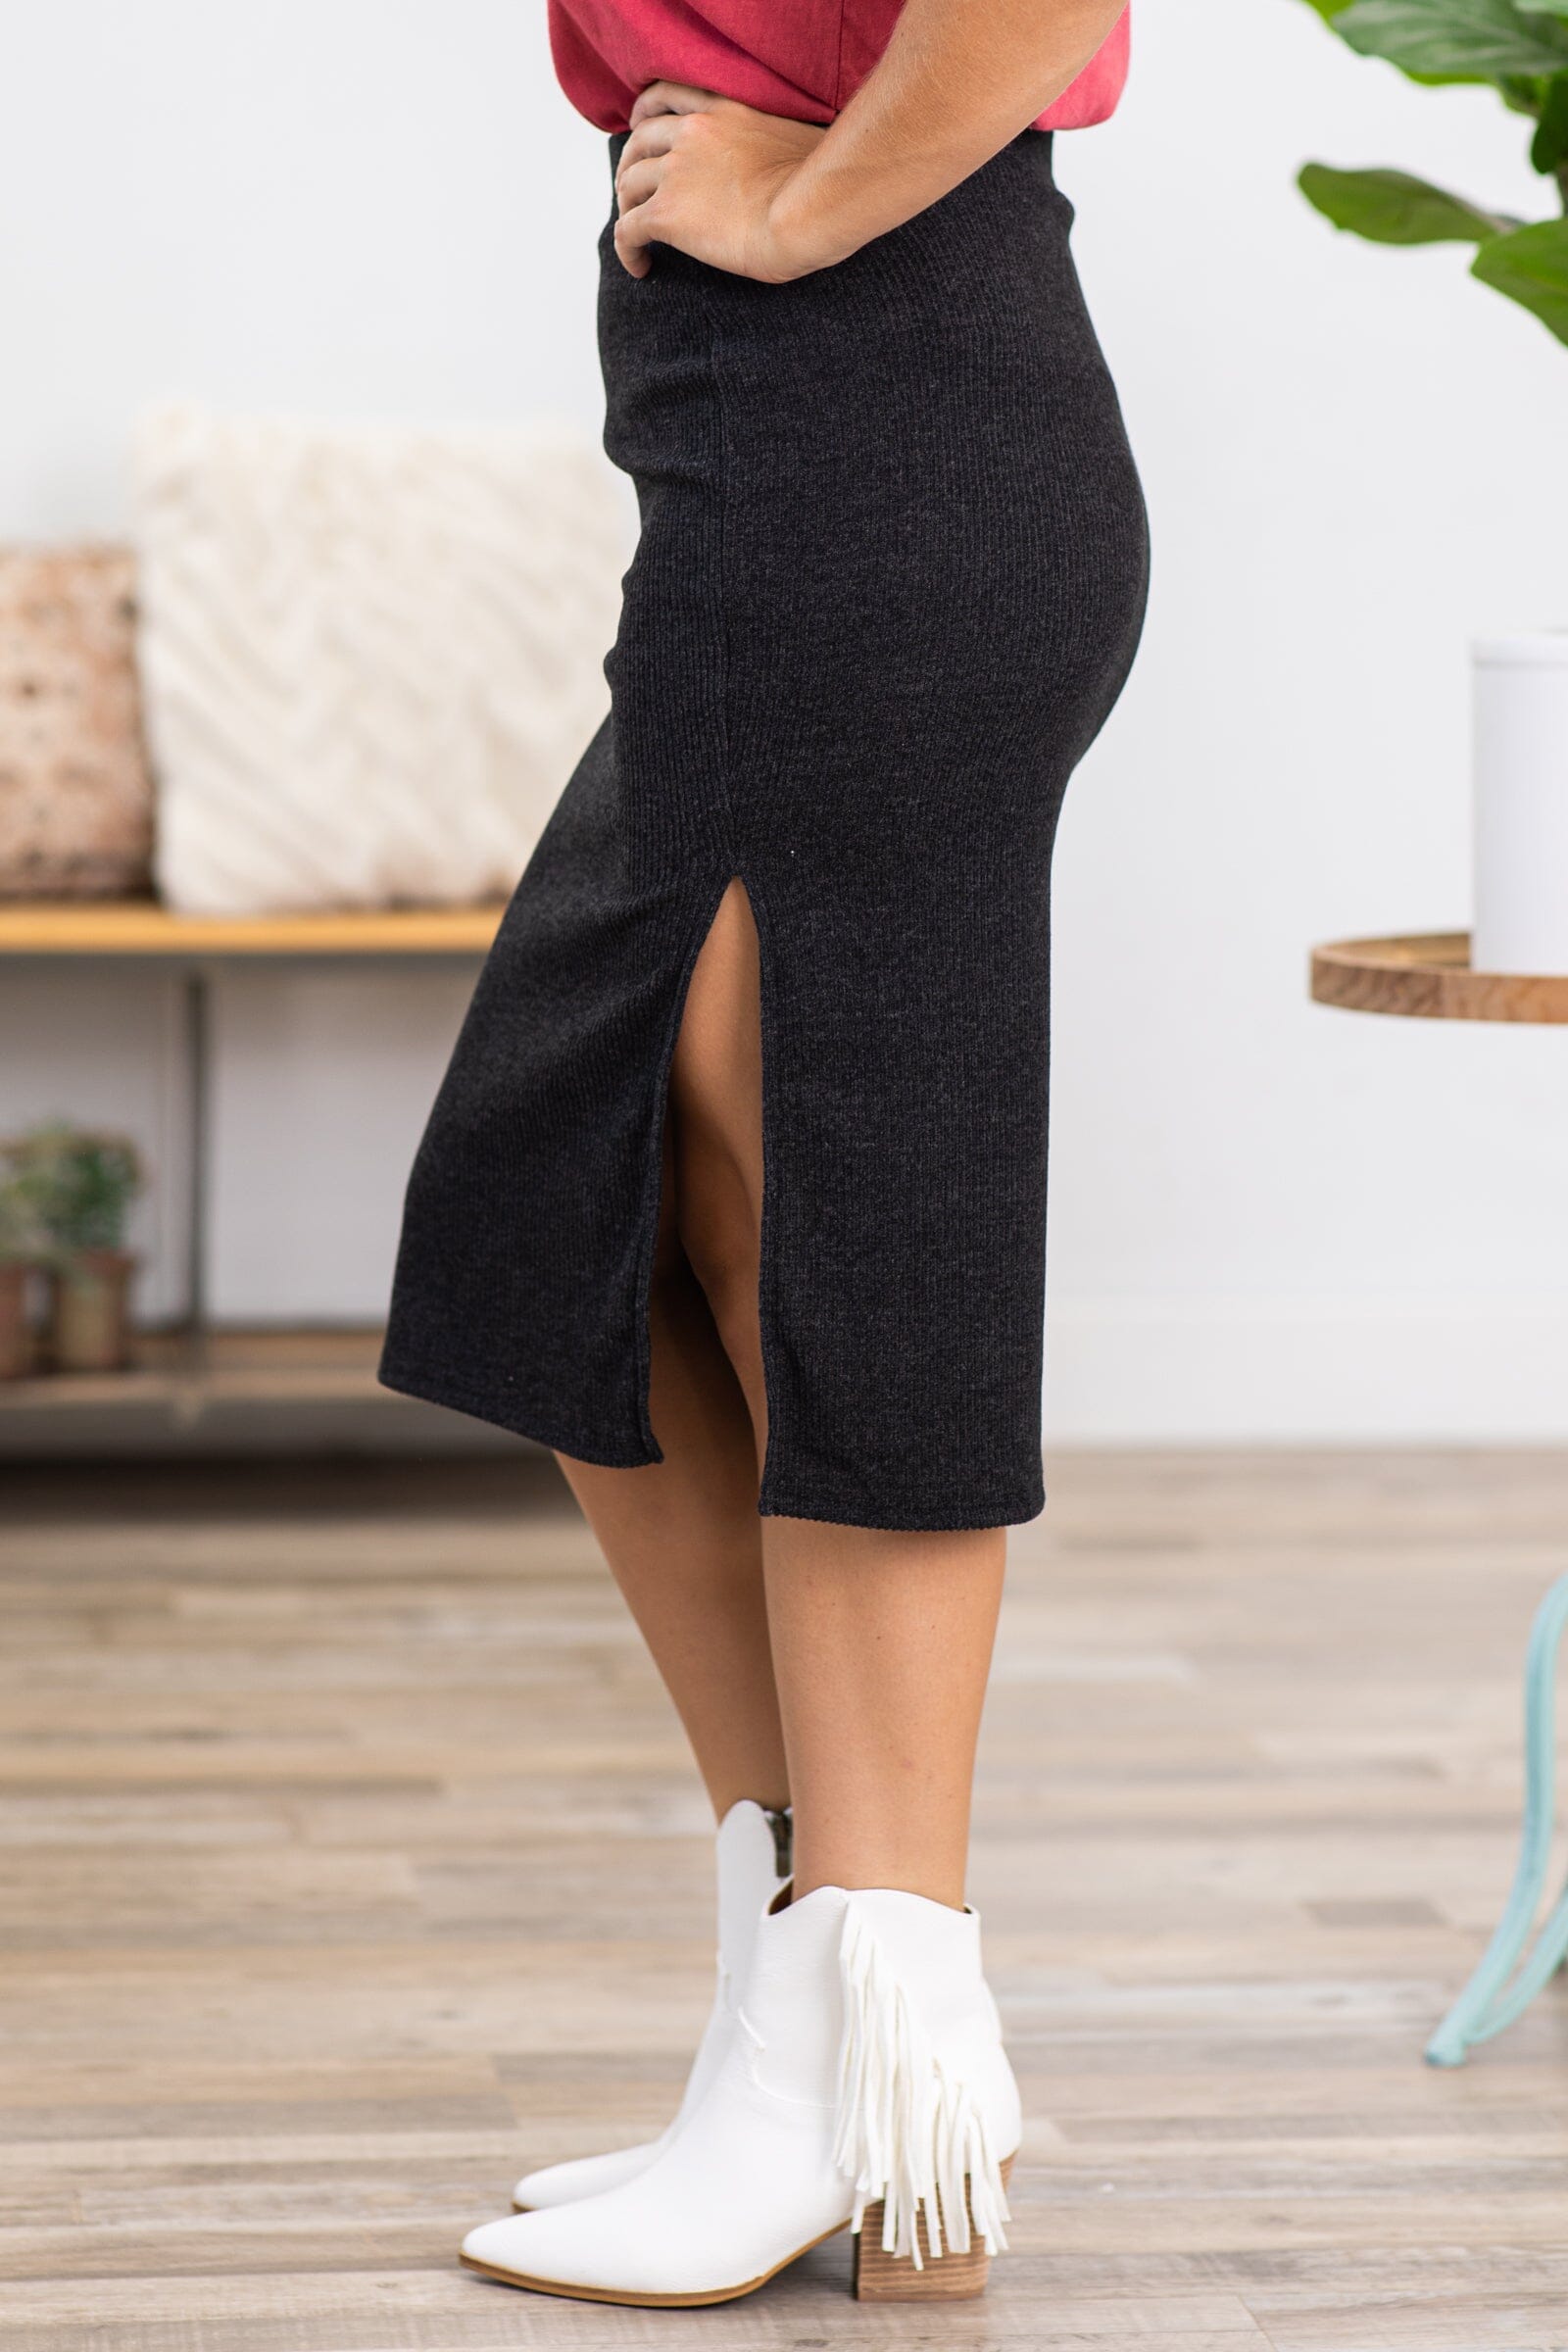 Charcoal Knit Midi Skirt With Side Slit - Filly Flair